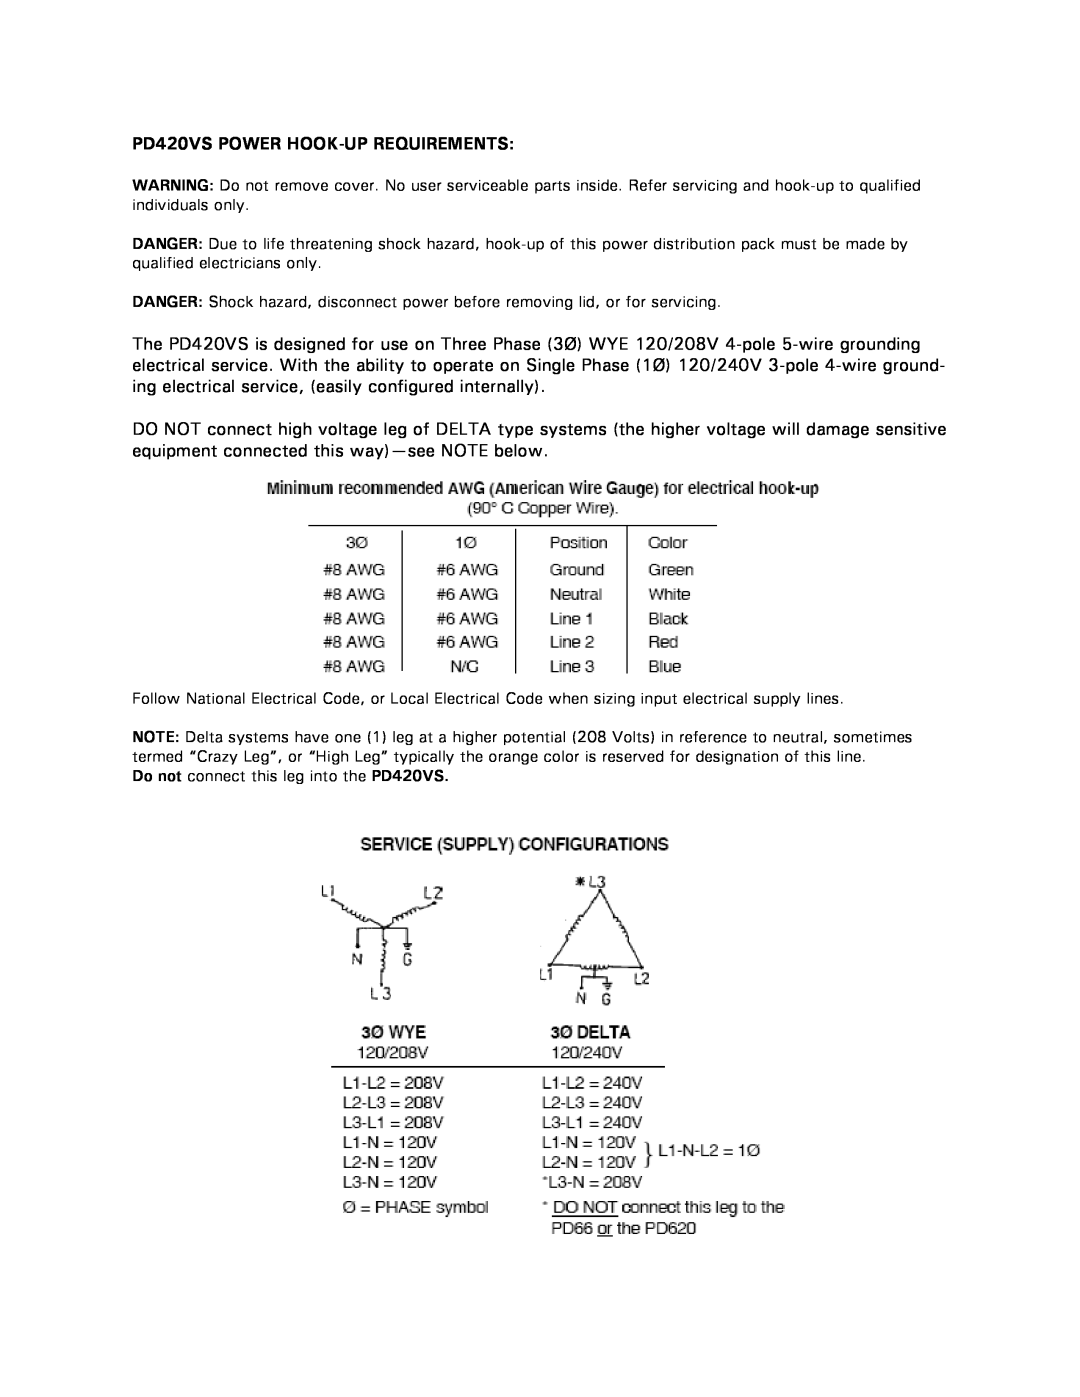 ETA Systems owner manual PD420VS POWER HOOK-UP REQUIREMENTS 